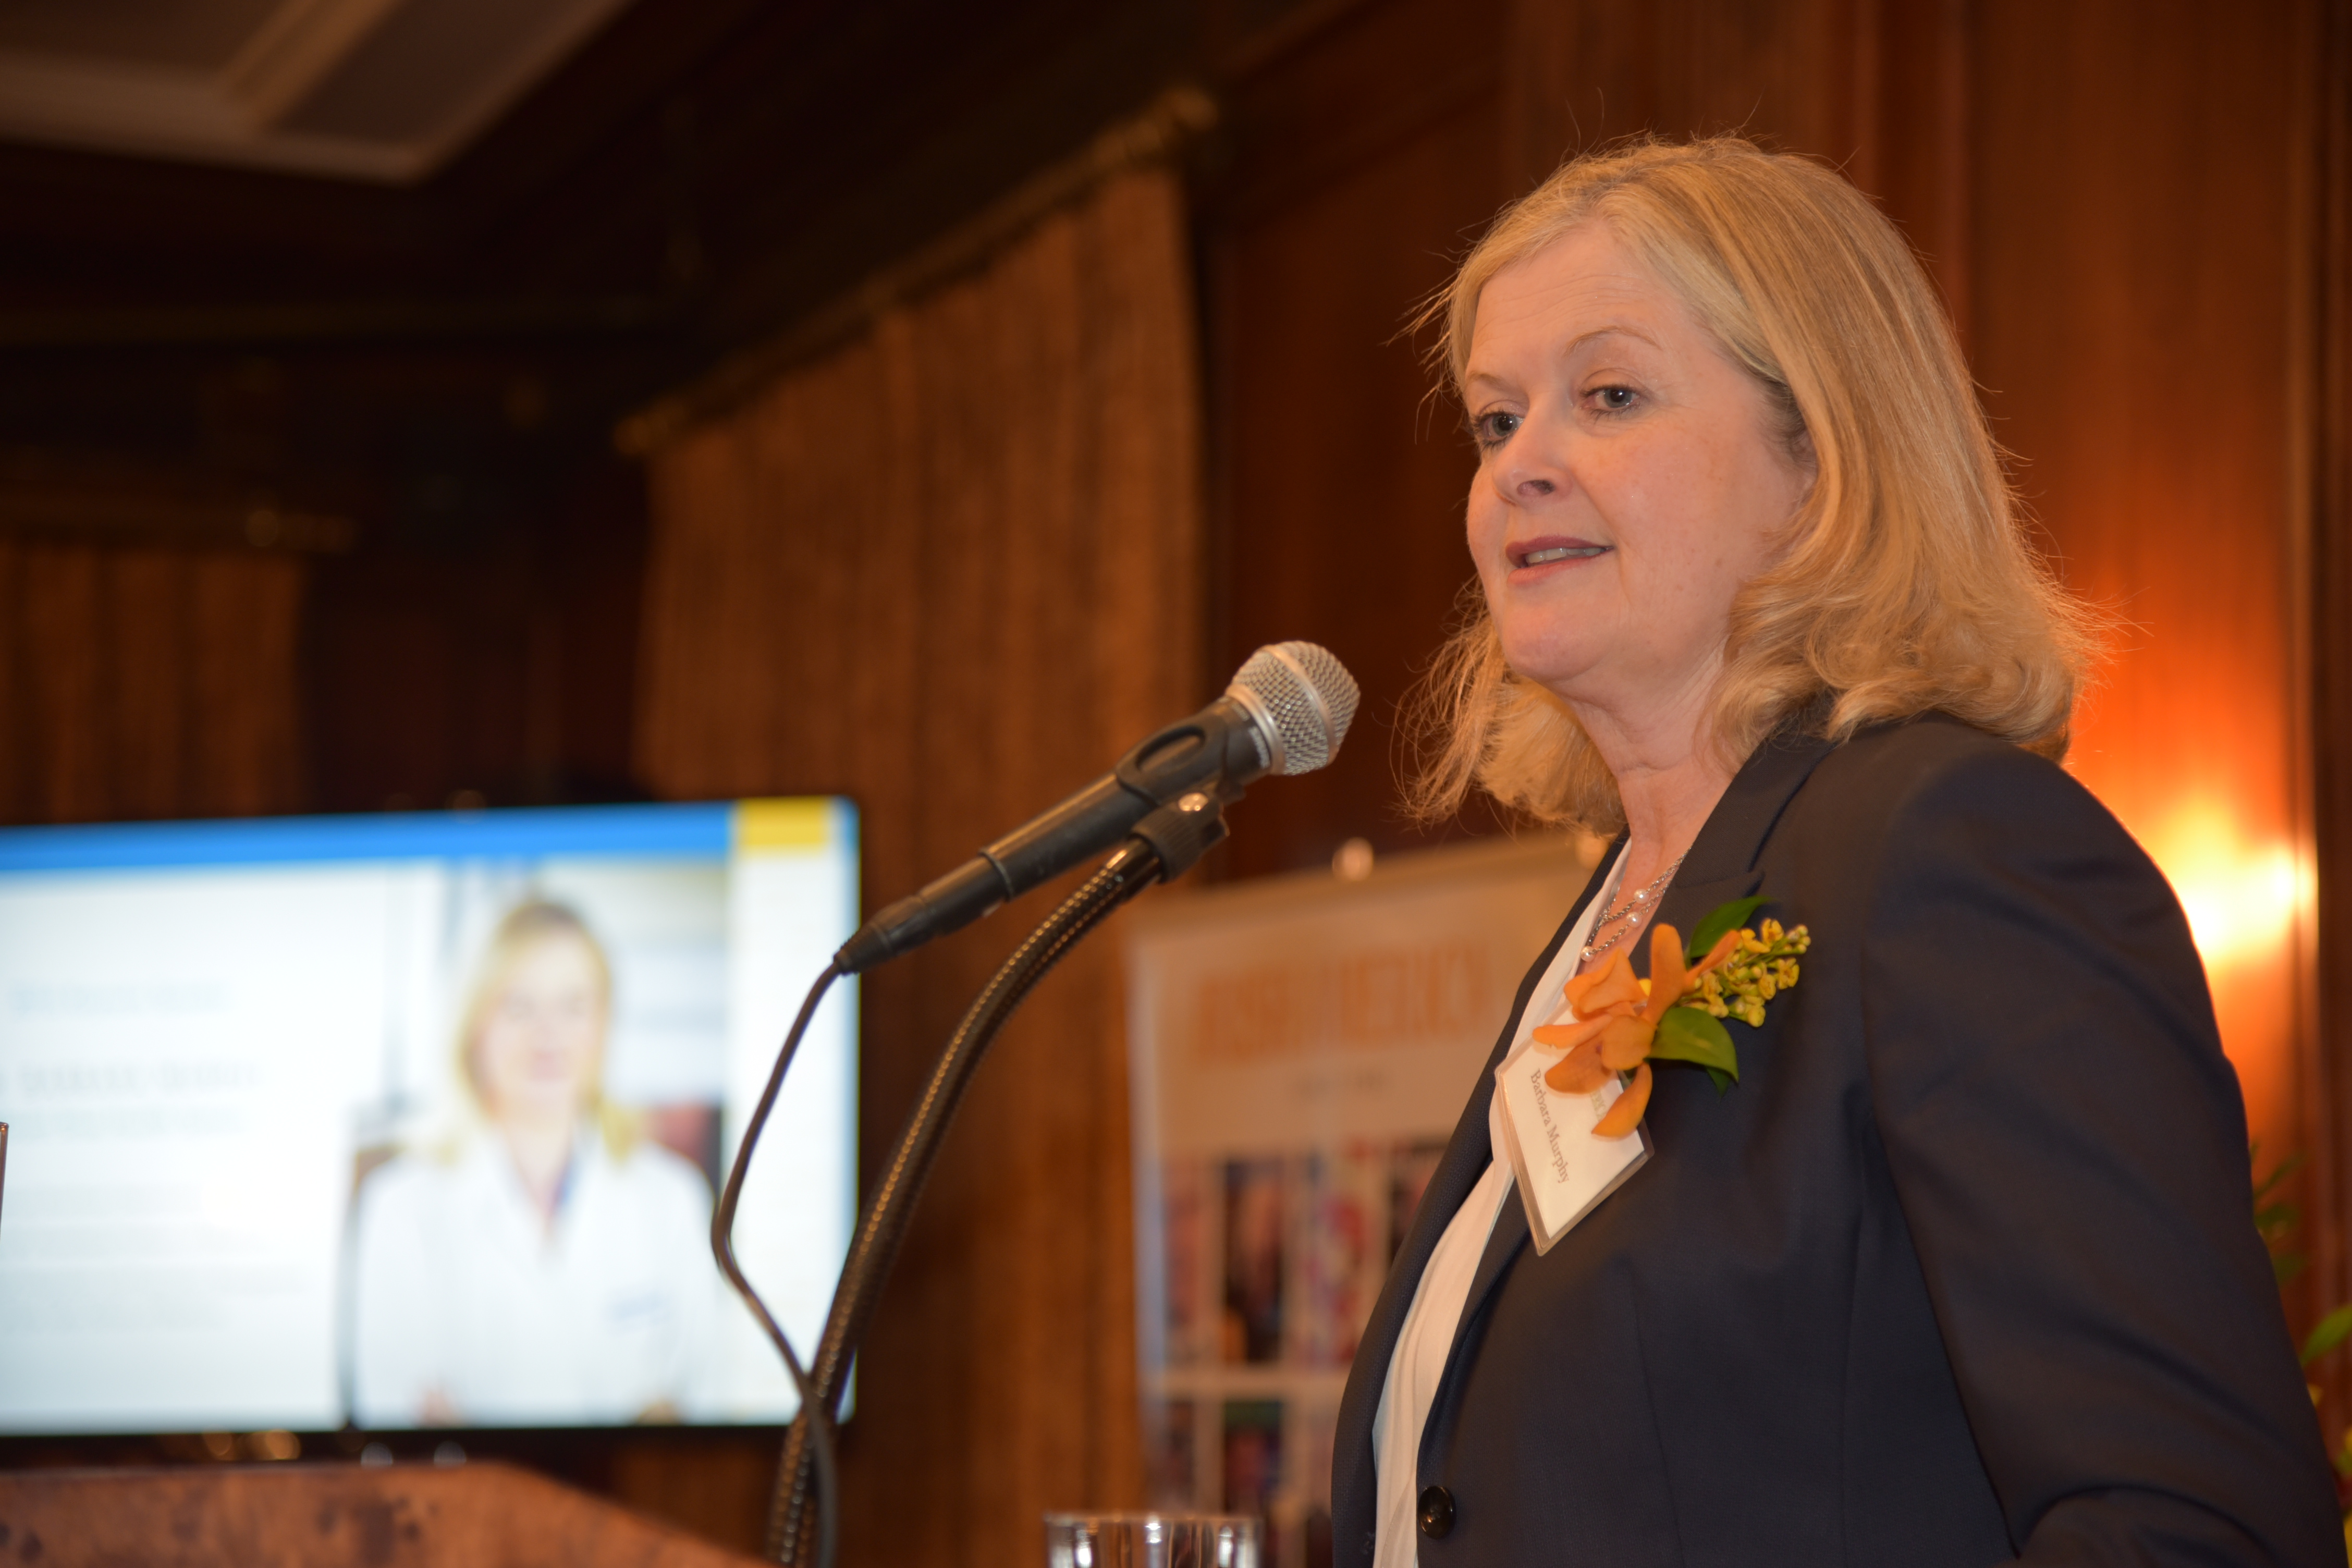 Dr. Barbara Murphy, chief of Medicine at Mount Sinai Health System, delivers the 3rd annual Healthcare and Life Sciences 50 keynote address in Manhattan. (Photo: Nuala Purcell)